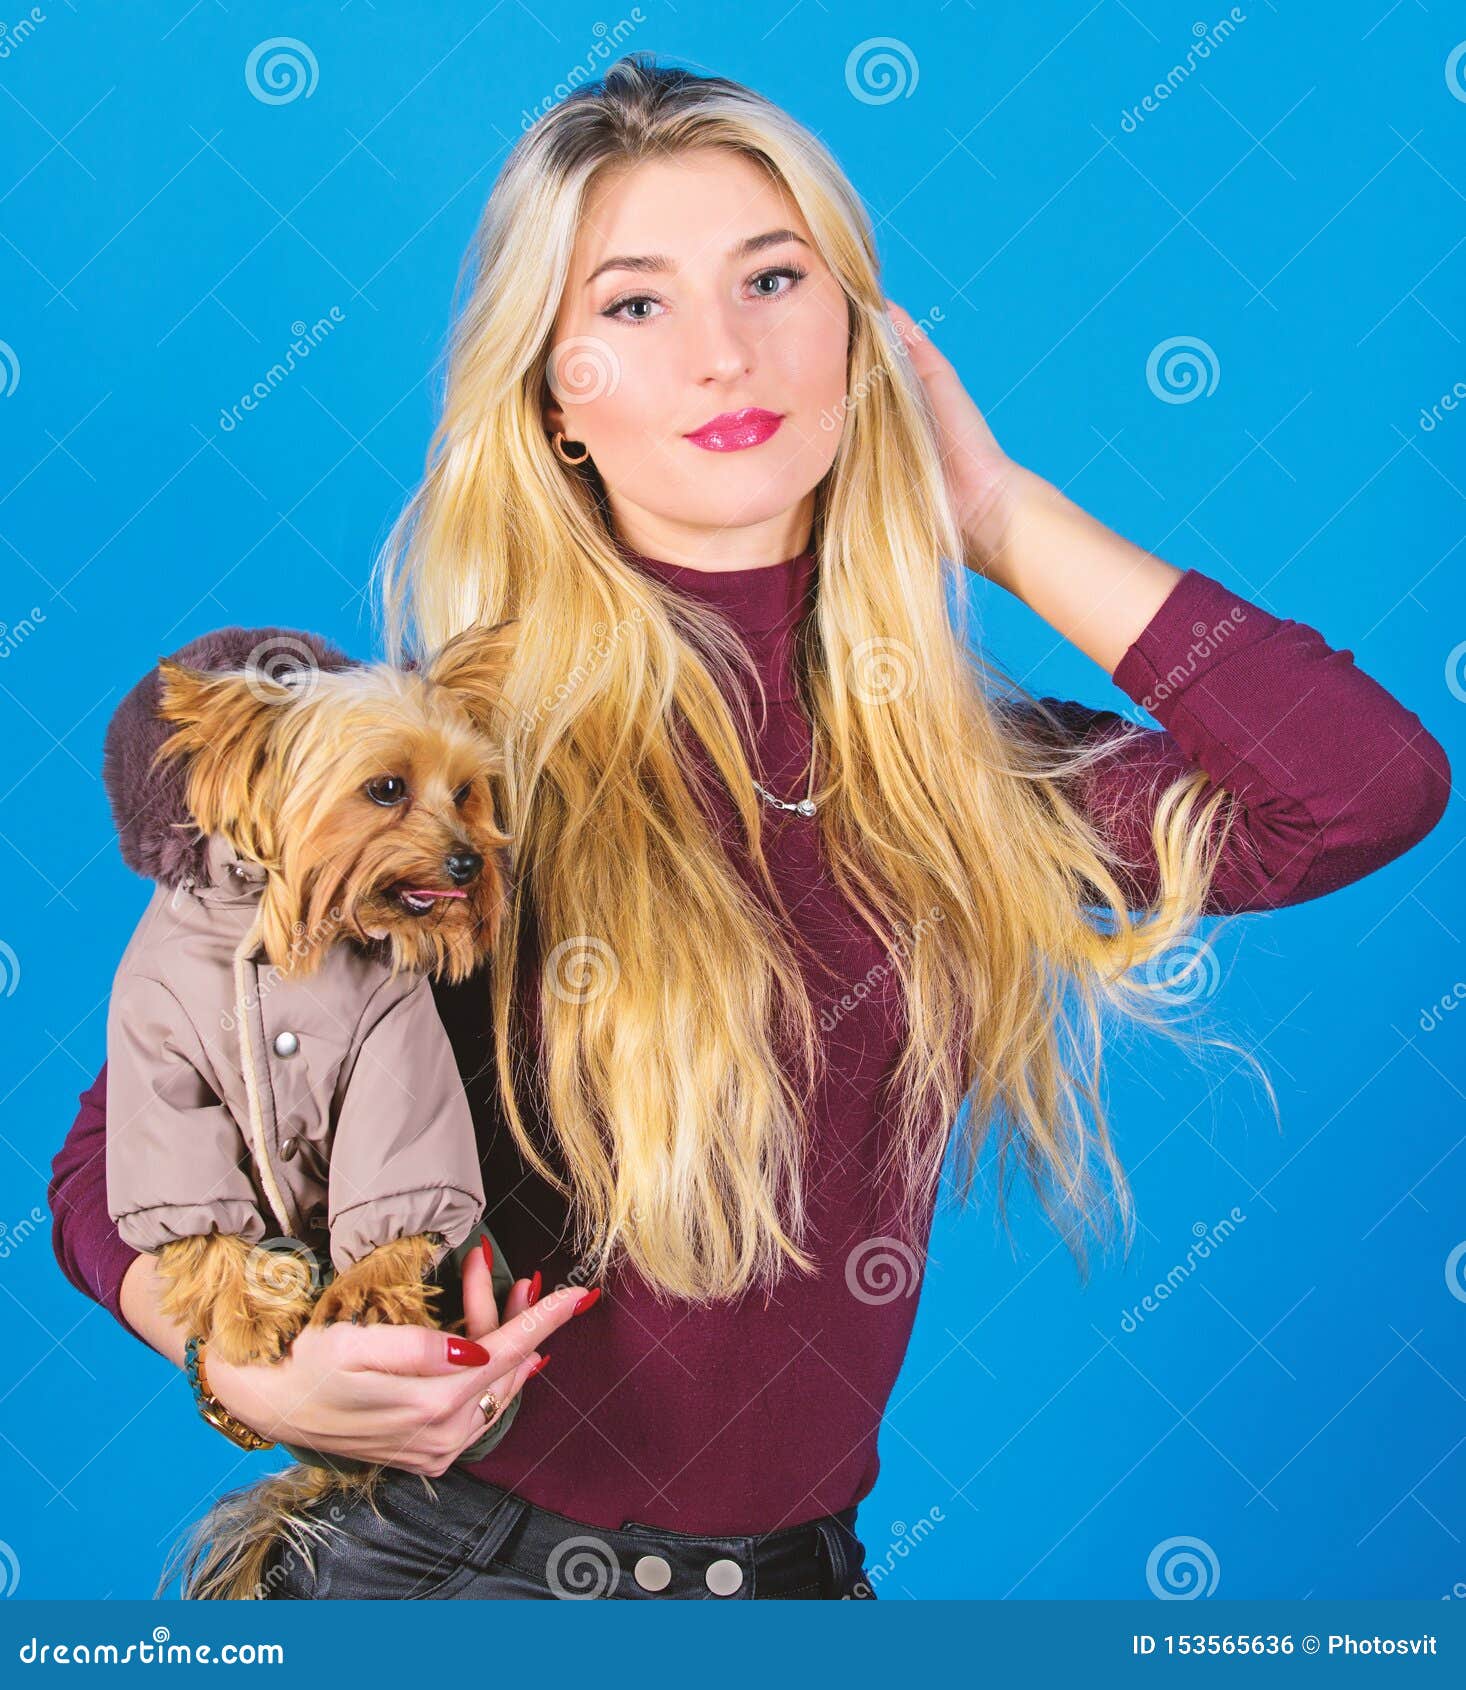 Dogs Need Clothes. Girl Adorable Blonde Hug Little Dog in Coat. Apparel and  Accessories. Pet Supplies Stock Photo - Image of fashionable, carry:  153565636